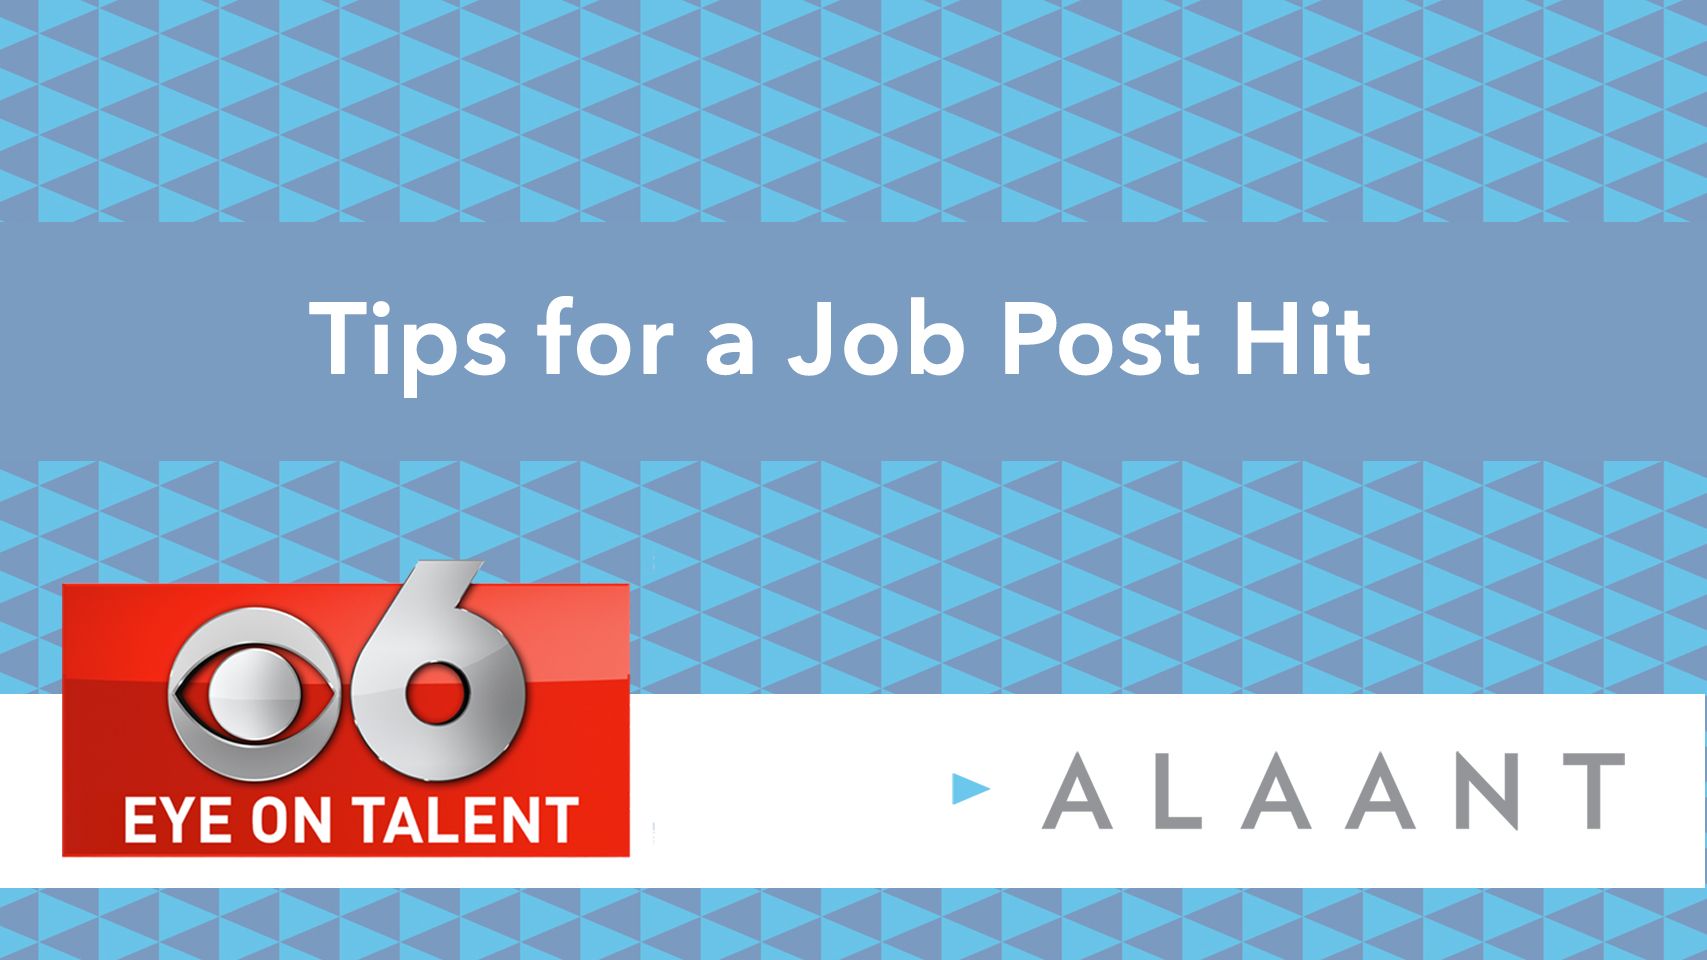 Alaant Eye on Talent Tips for a Job Post Hit